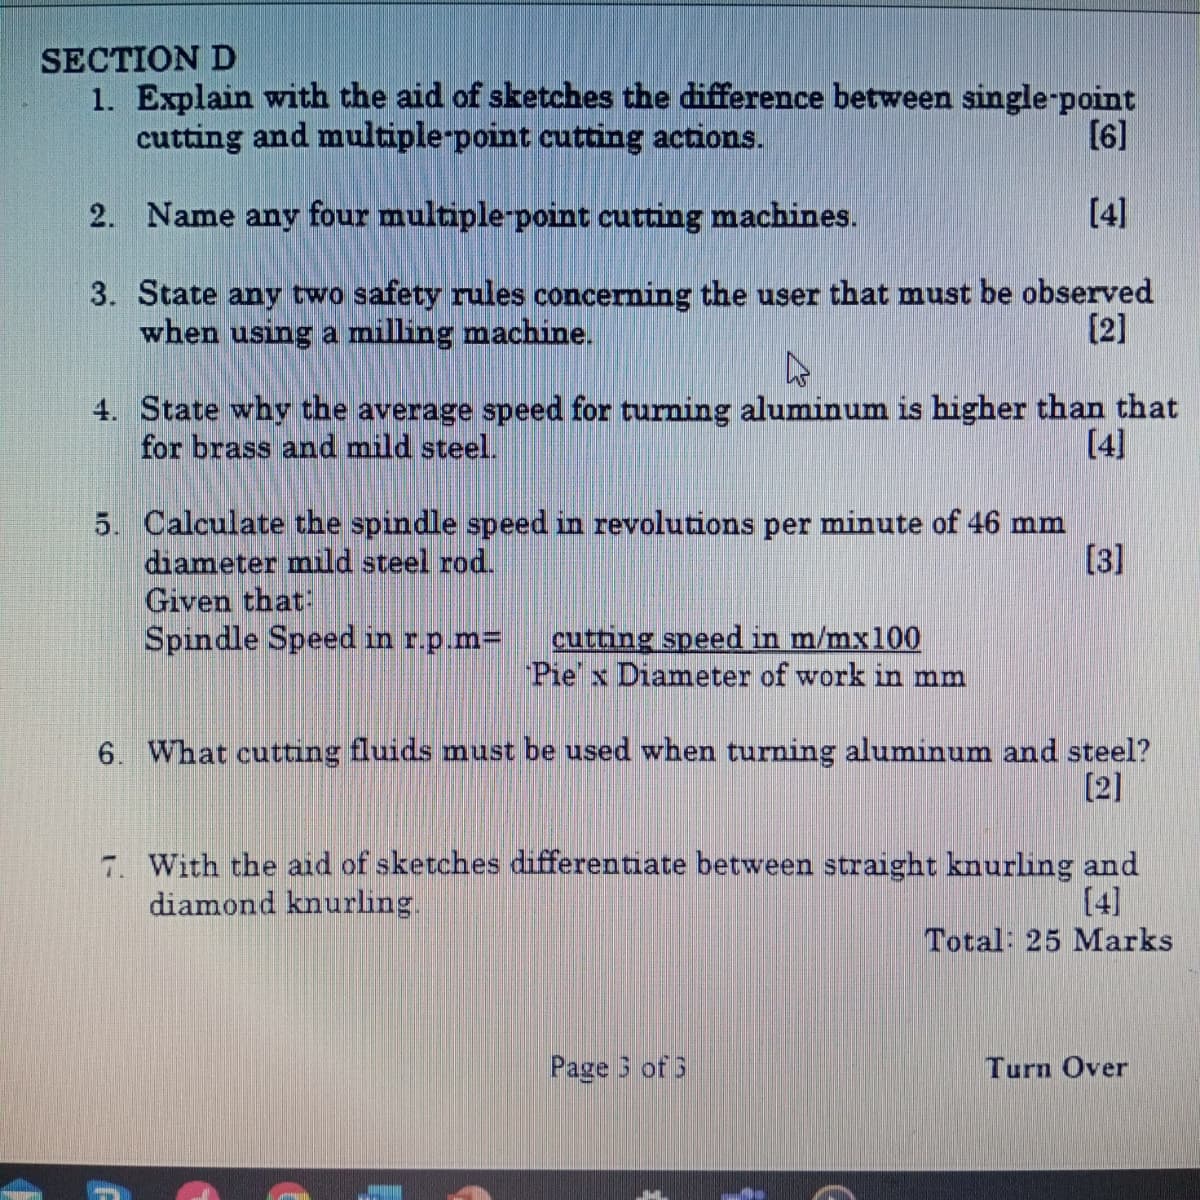 SECTION D
1. Explain with the aid of sketches the difference between single-point
cutting and multiple-point cutting actions.
2. Name any four multiple-point cutting machines.
[6]
[4]
3. State any two safety rules concerning the user that must be observed
when using a milling machine.
[2]
4. State why the average speed for turning aluminum is higher than that
for brass and mild steel.
5. Calculate the spindle speed in revolutions per minute of 46 mm
diameter mild steel rod.
[4]
[3]
Given that:
Spindle Speed in r.p.m=
cutting speed in m/mx100
PiexDiameter of work in mm
6. What cutting fluids must be used when turning aluminum and steel?
[2]
7. With the aid of sketches differentiate between straight knurling and
diamond knurling.
[4]
Total: 25 Marks
Page 3 of 3
Turn Over